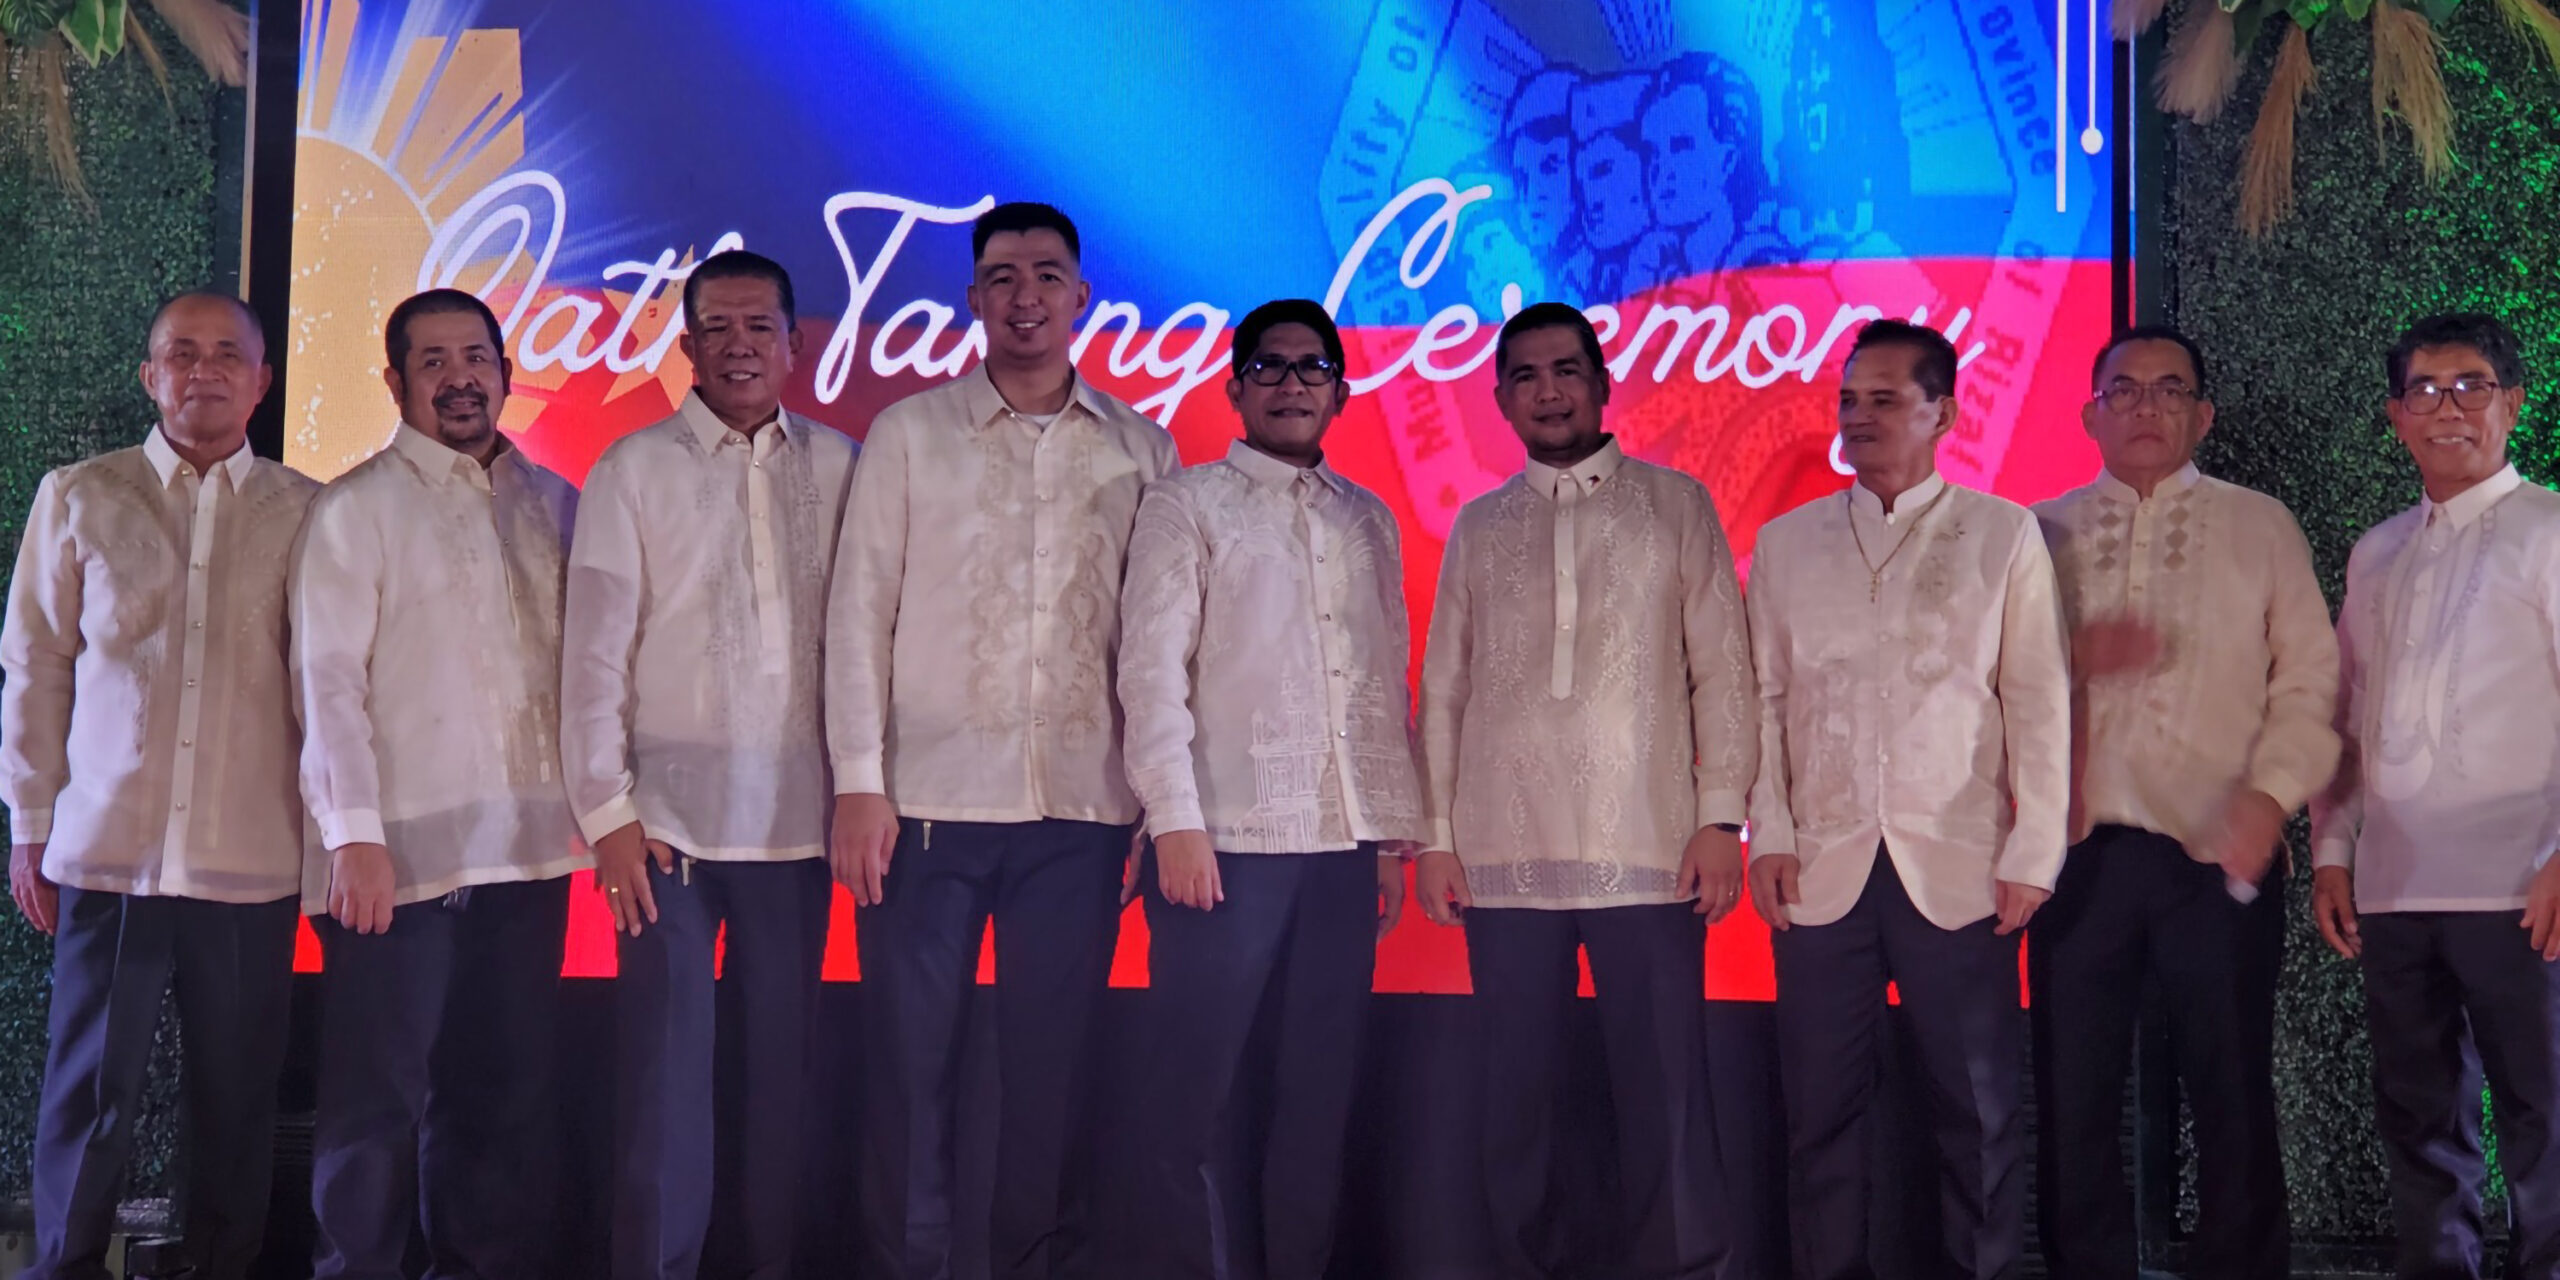 The Inaugural Ceremonies of the newly elected and re-elected Municipal Officials of Morong, Rizal for the term 2022-2025.